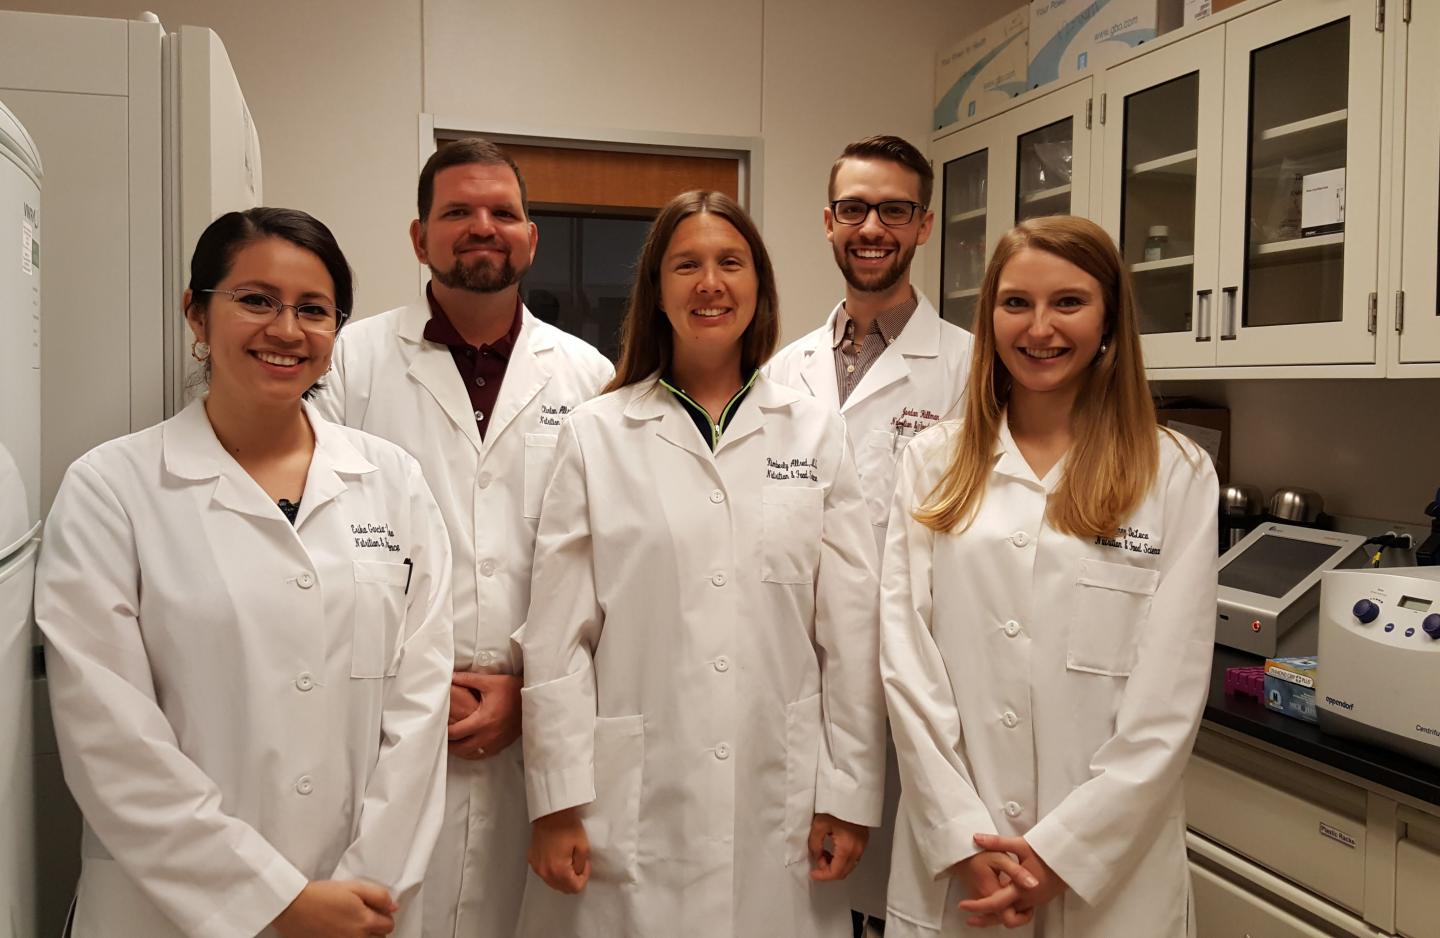 Dr. Clint Allred and Colleagues